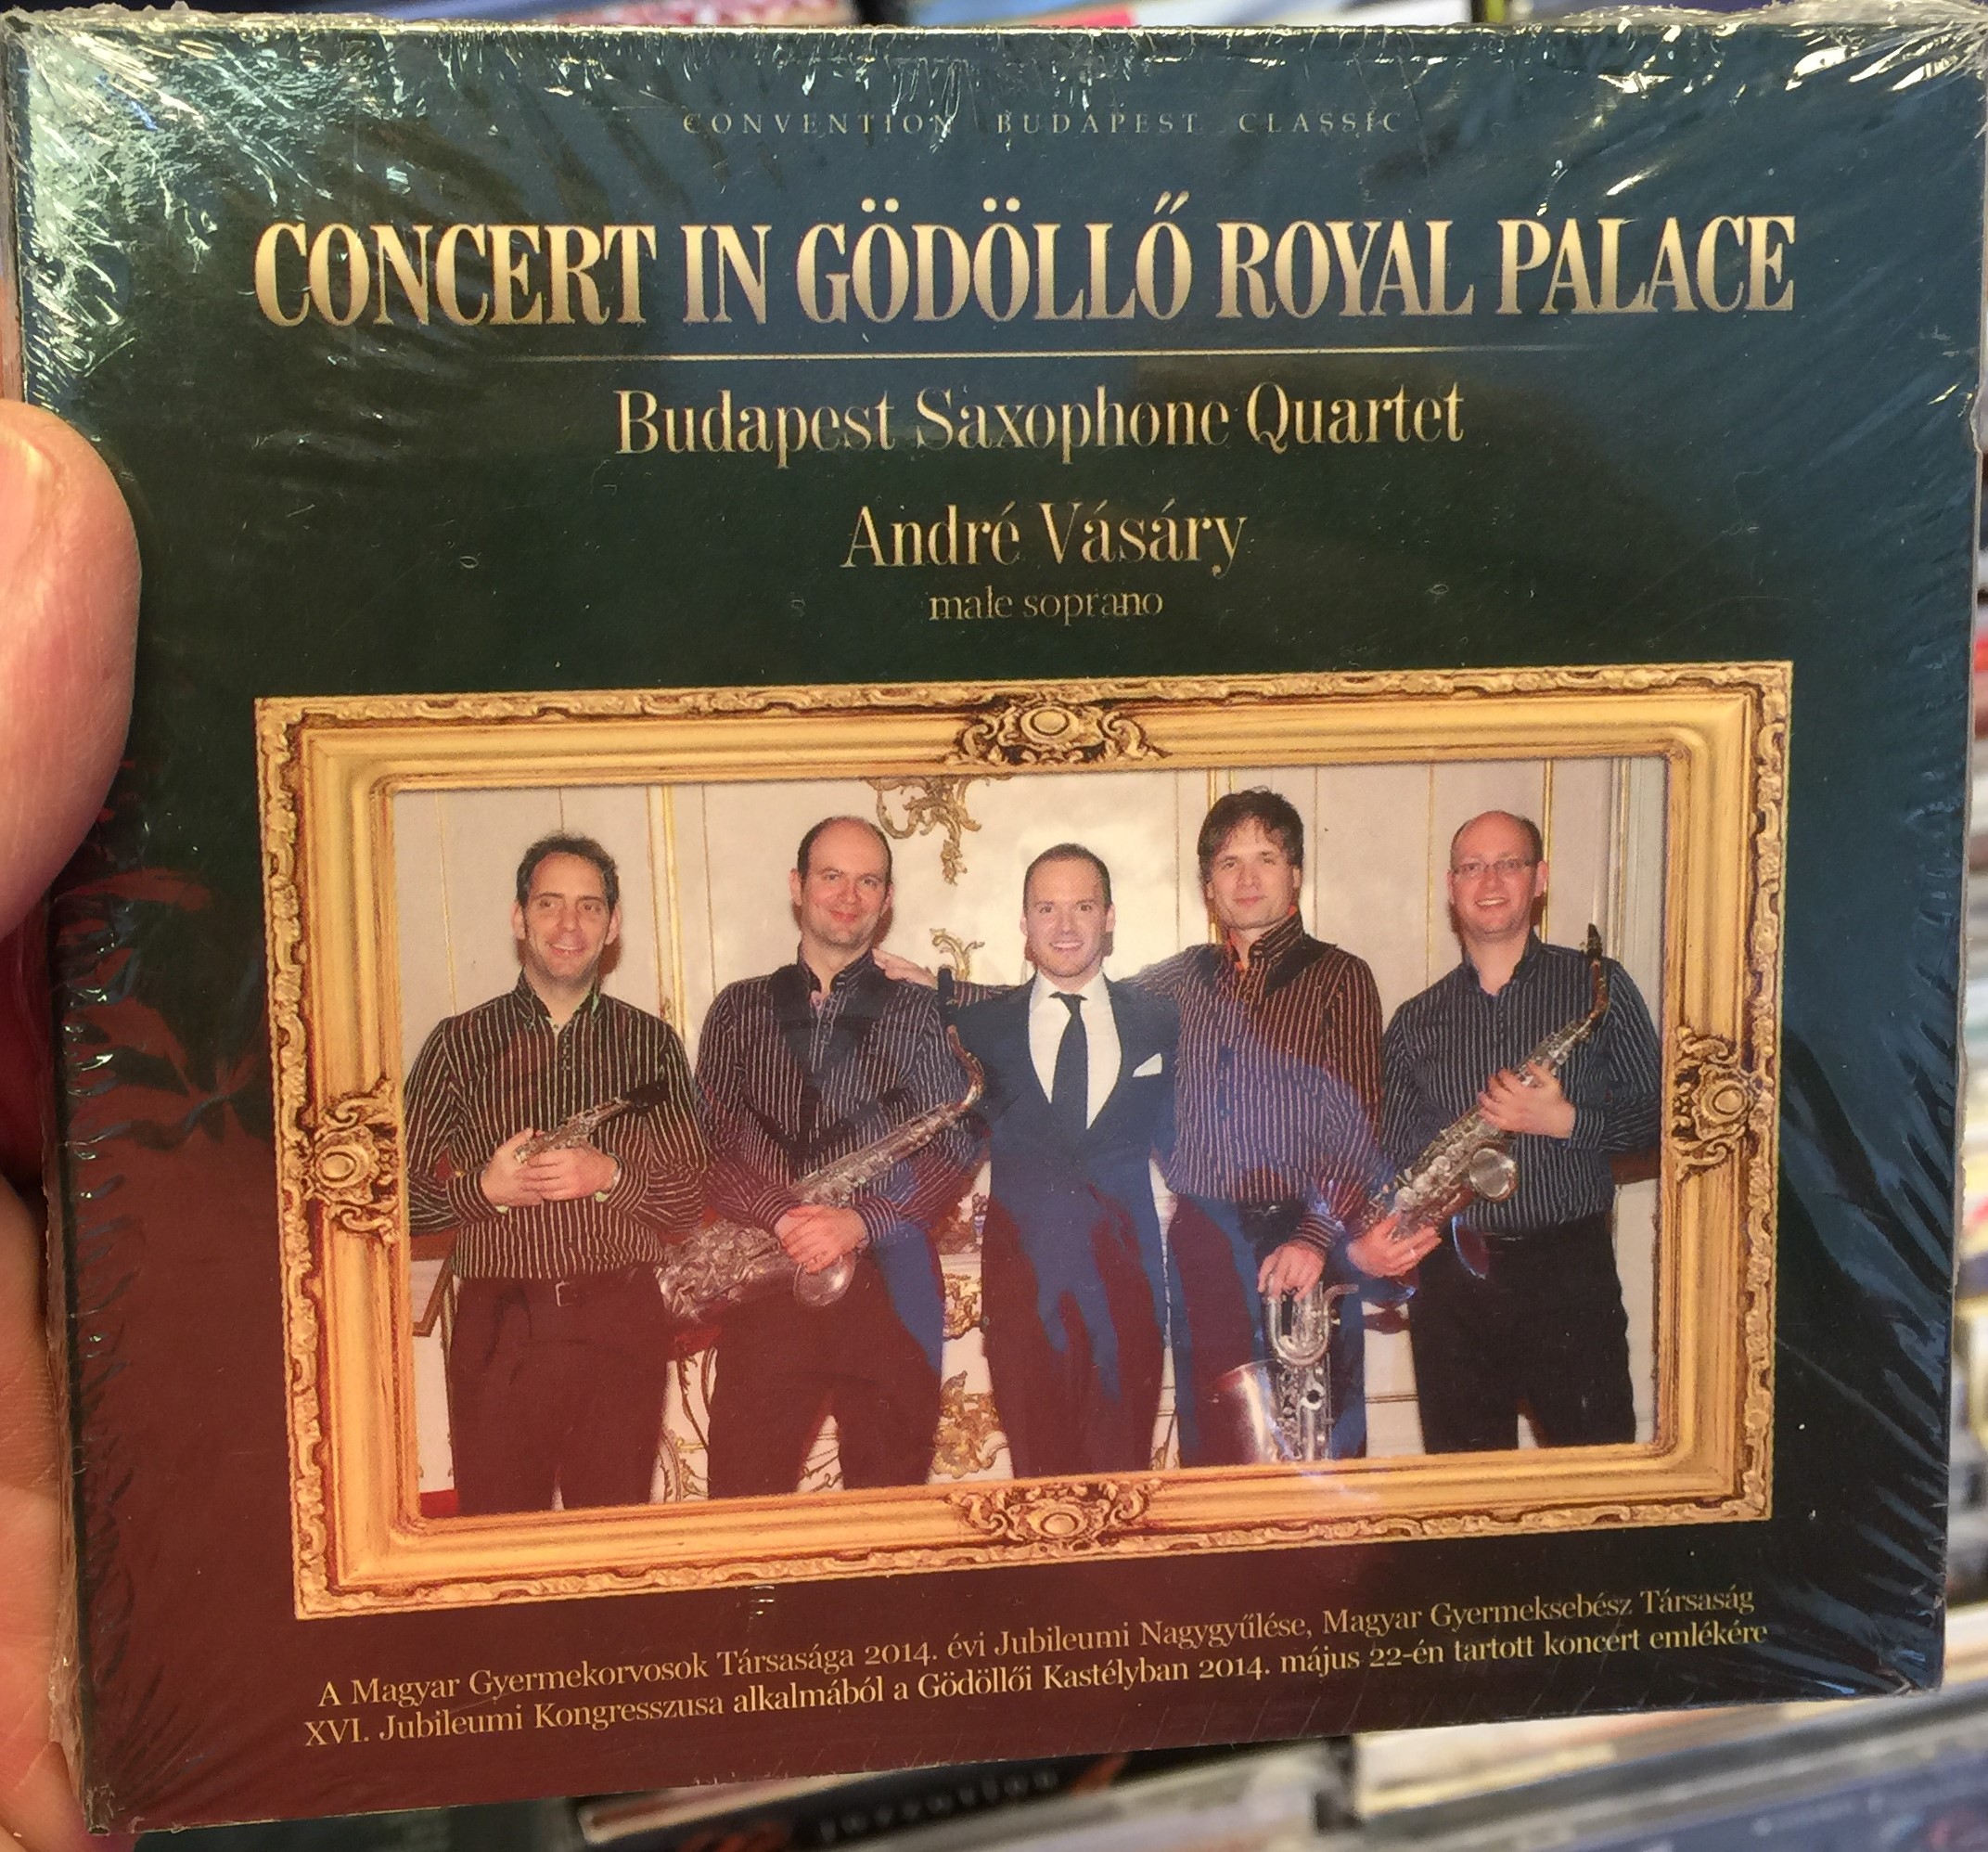 concert-in-g-d-ll-royal-palace-budapest-saxophone-quartet-andr-v-s-ry-male-soprano-convention-budapest-classics-audio-cd-2014-cbp-043-1-.jpg